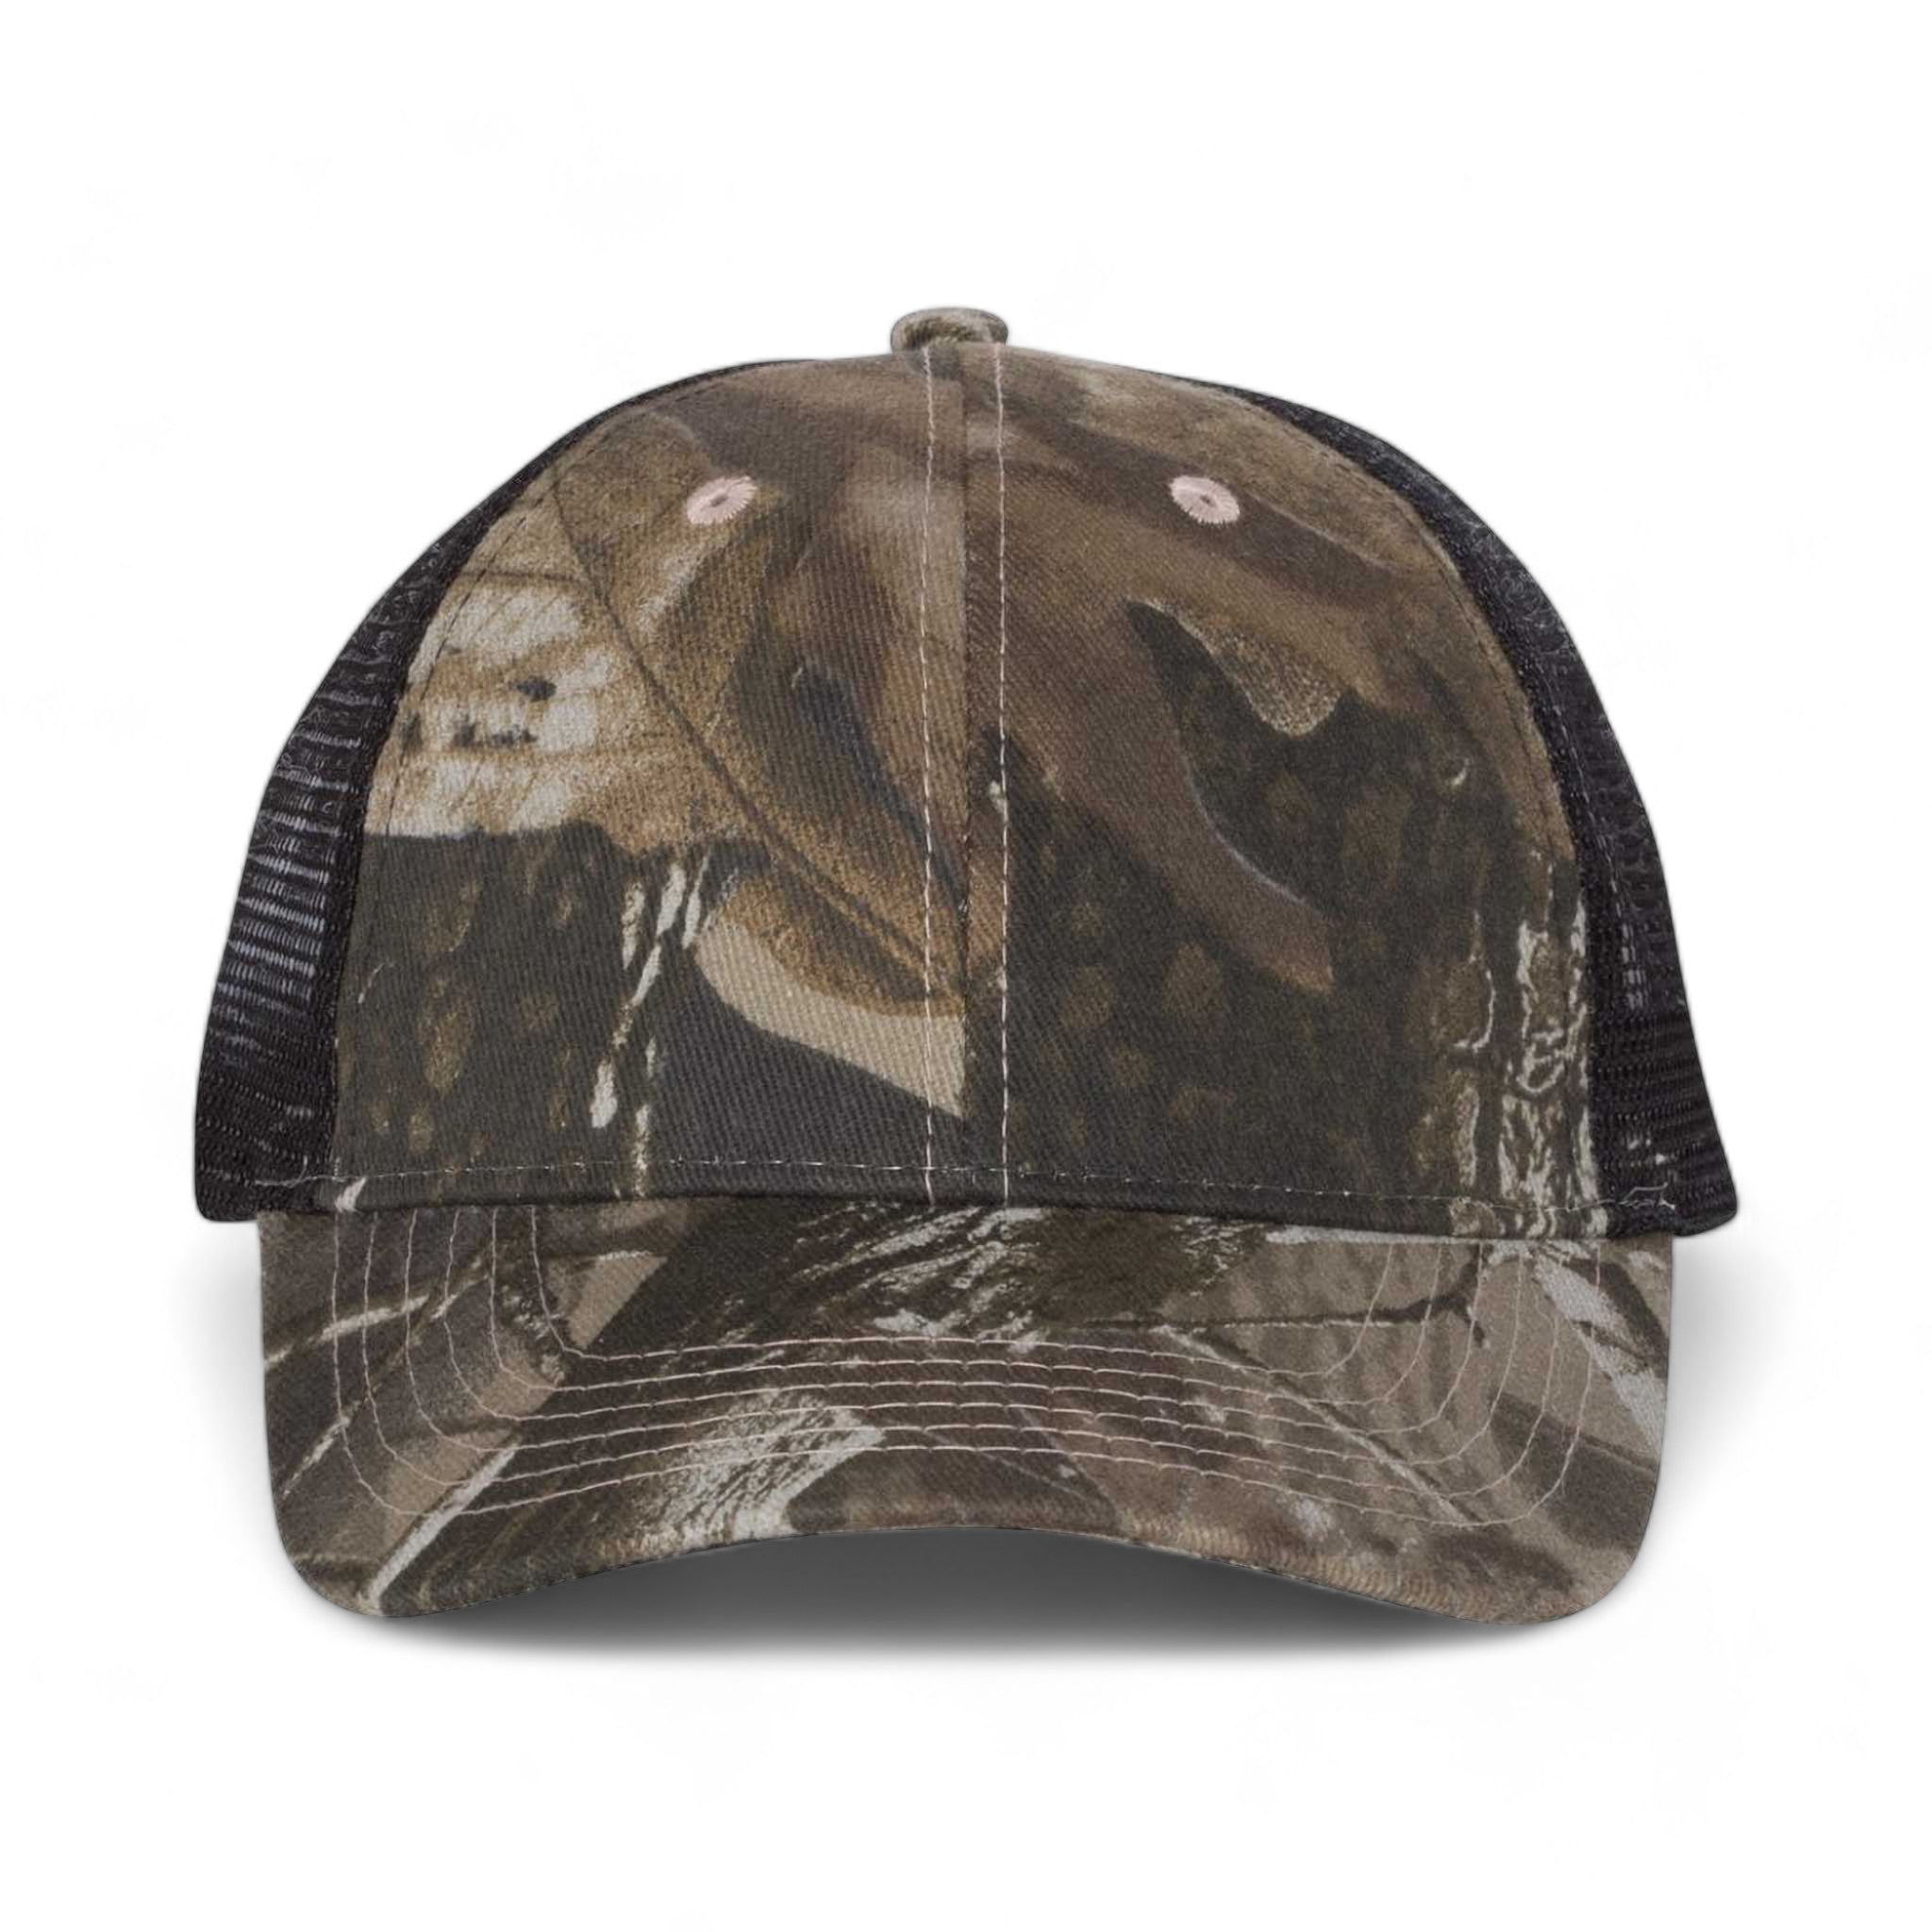 Front view of Kati LC5M custom hat in realtree hardwoods and black